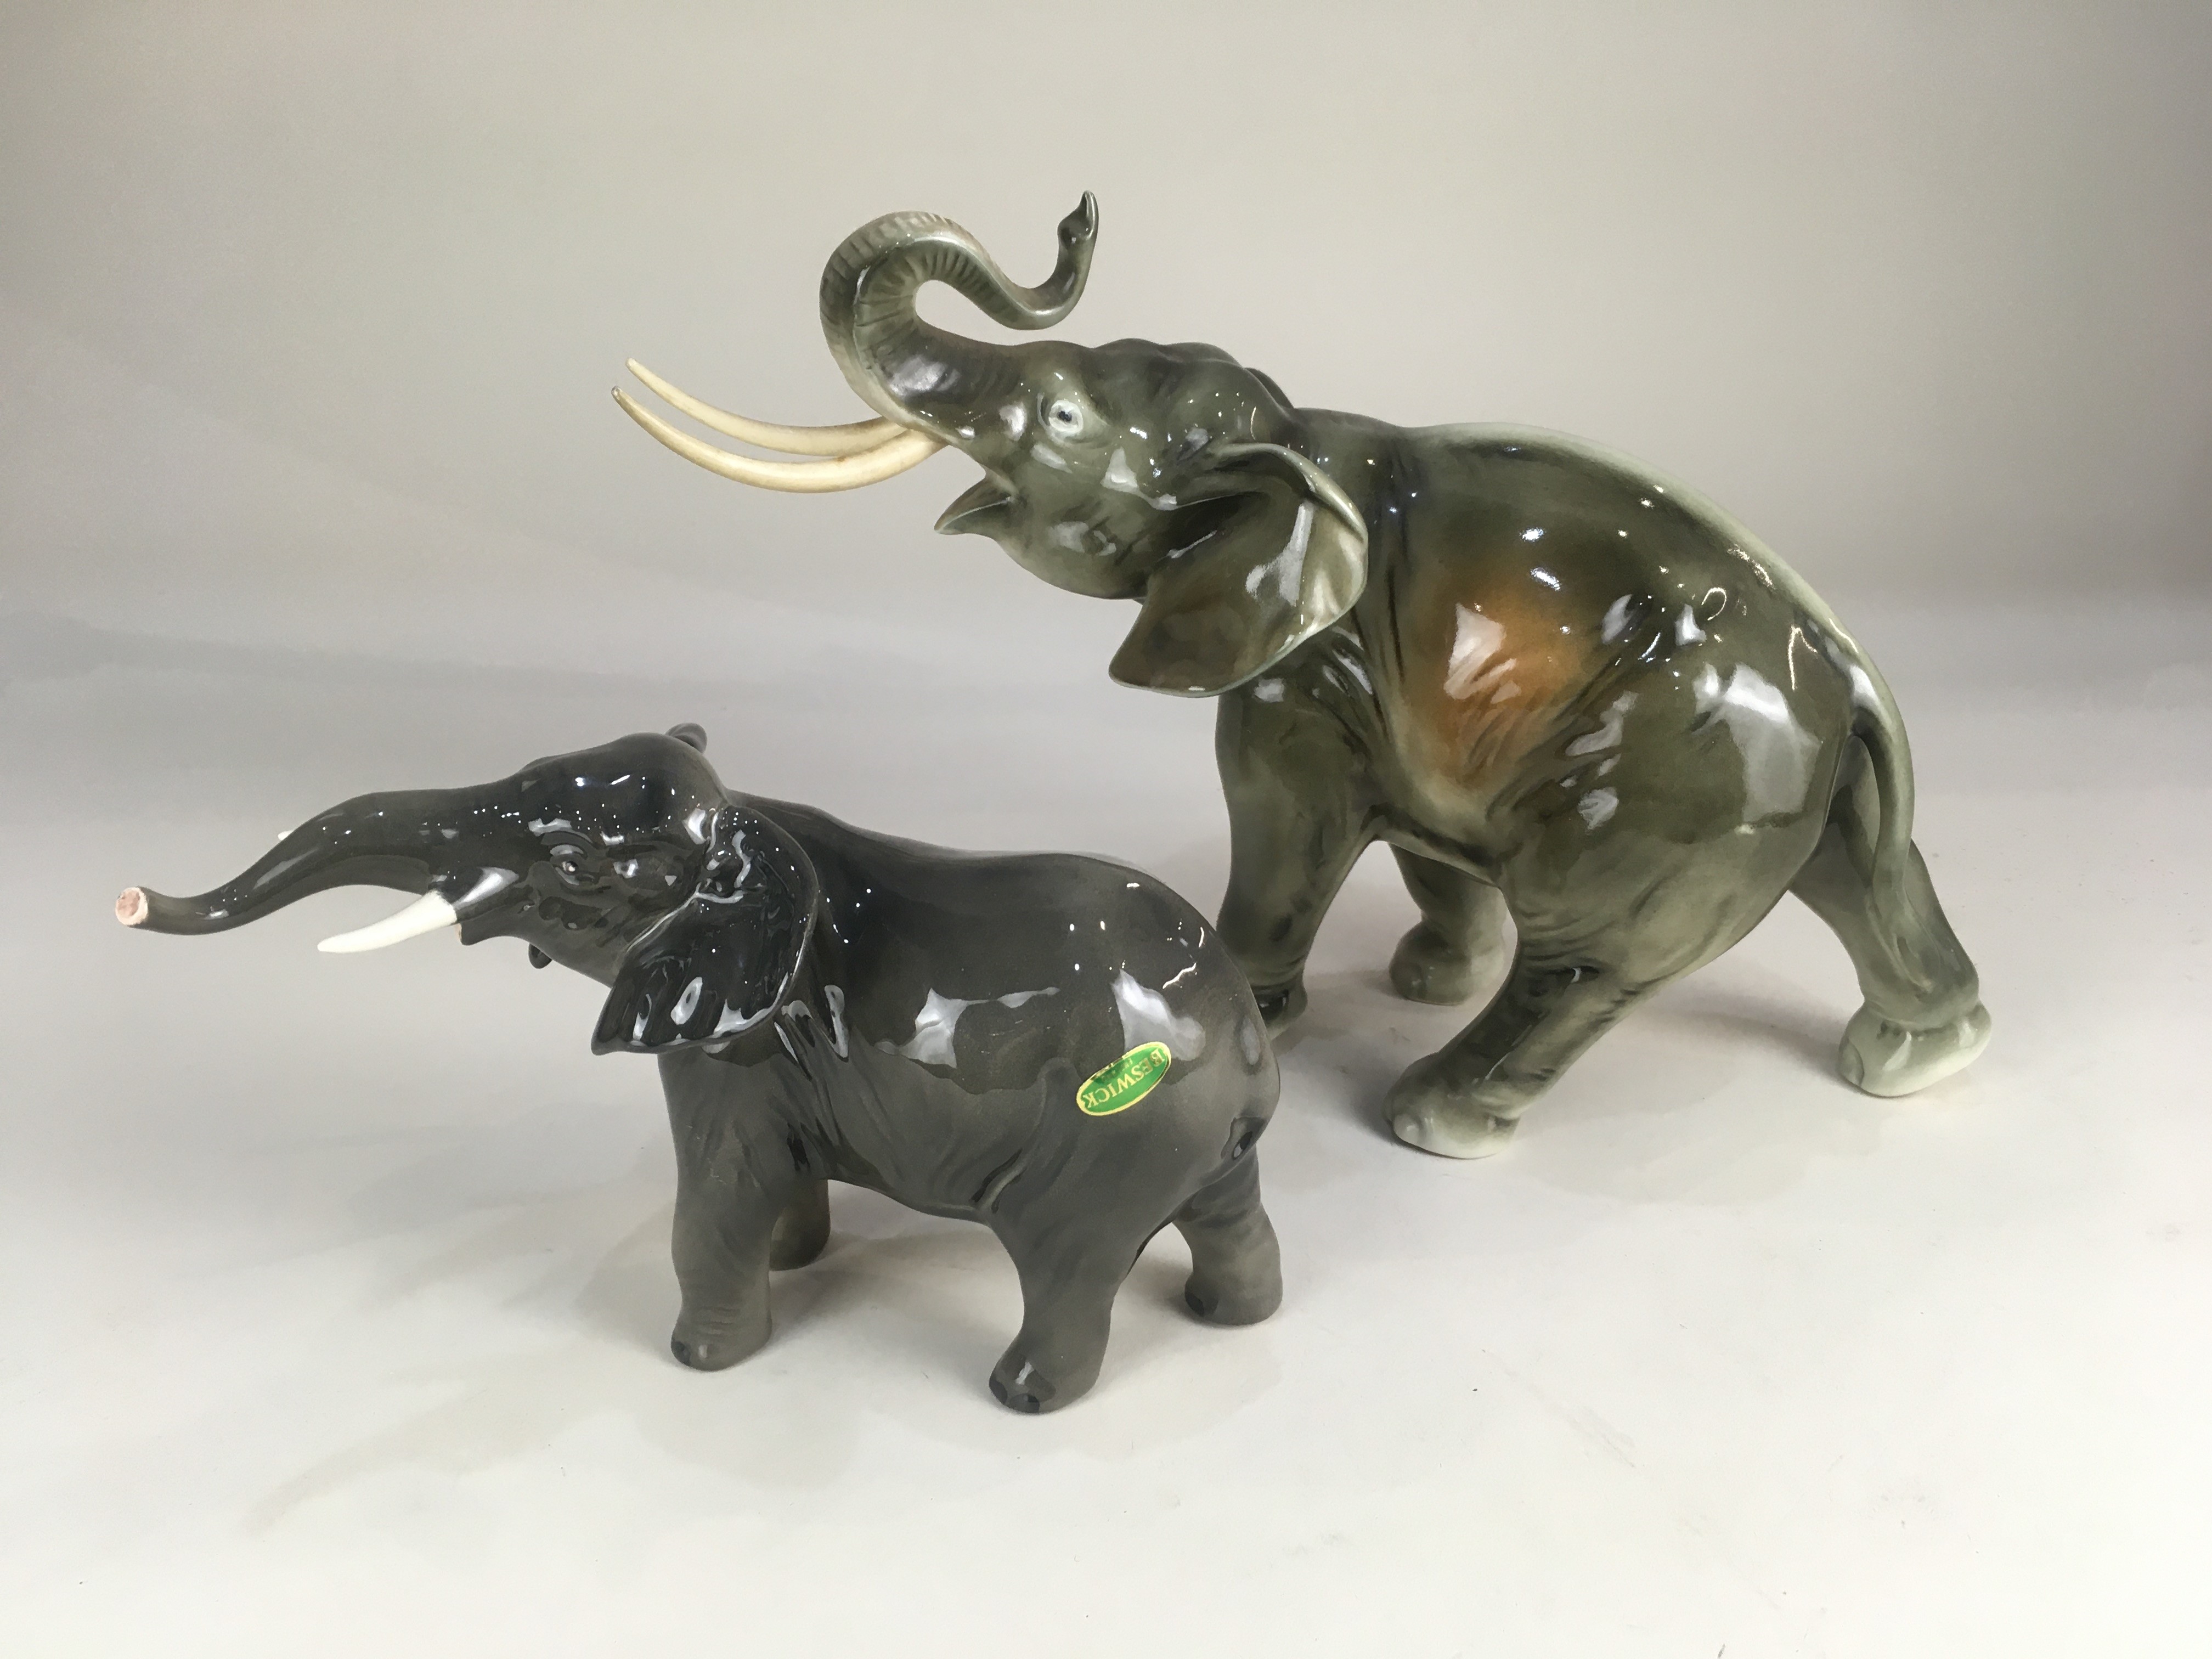 A Beswick porcelain model of an elephant, 12.5cm high, together with a Royal Dux model of an